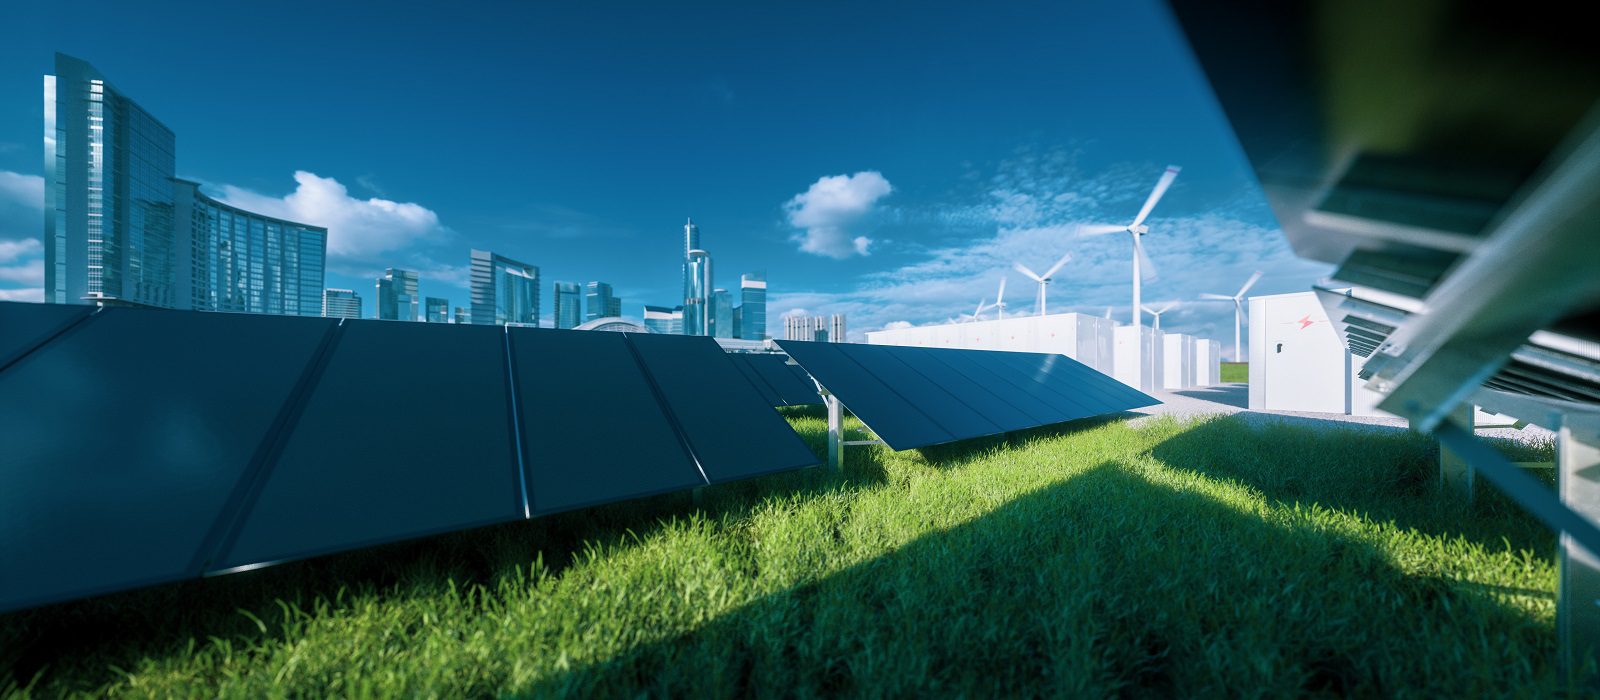 Modern black frameless solar panel farm, battery energy storage and wind turbines on fresh green grass under blue sky - concept of green sustainable energy  system. 3d rendering.